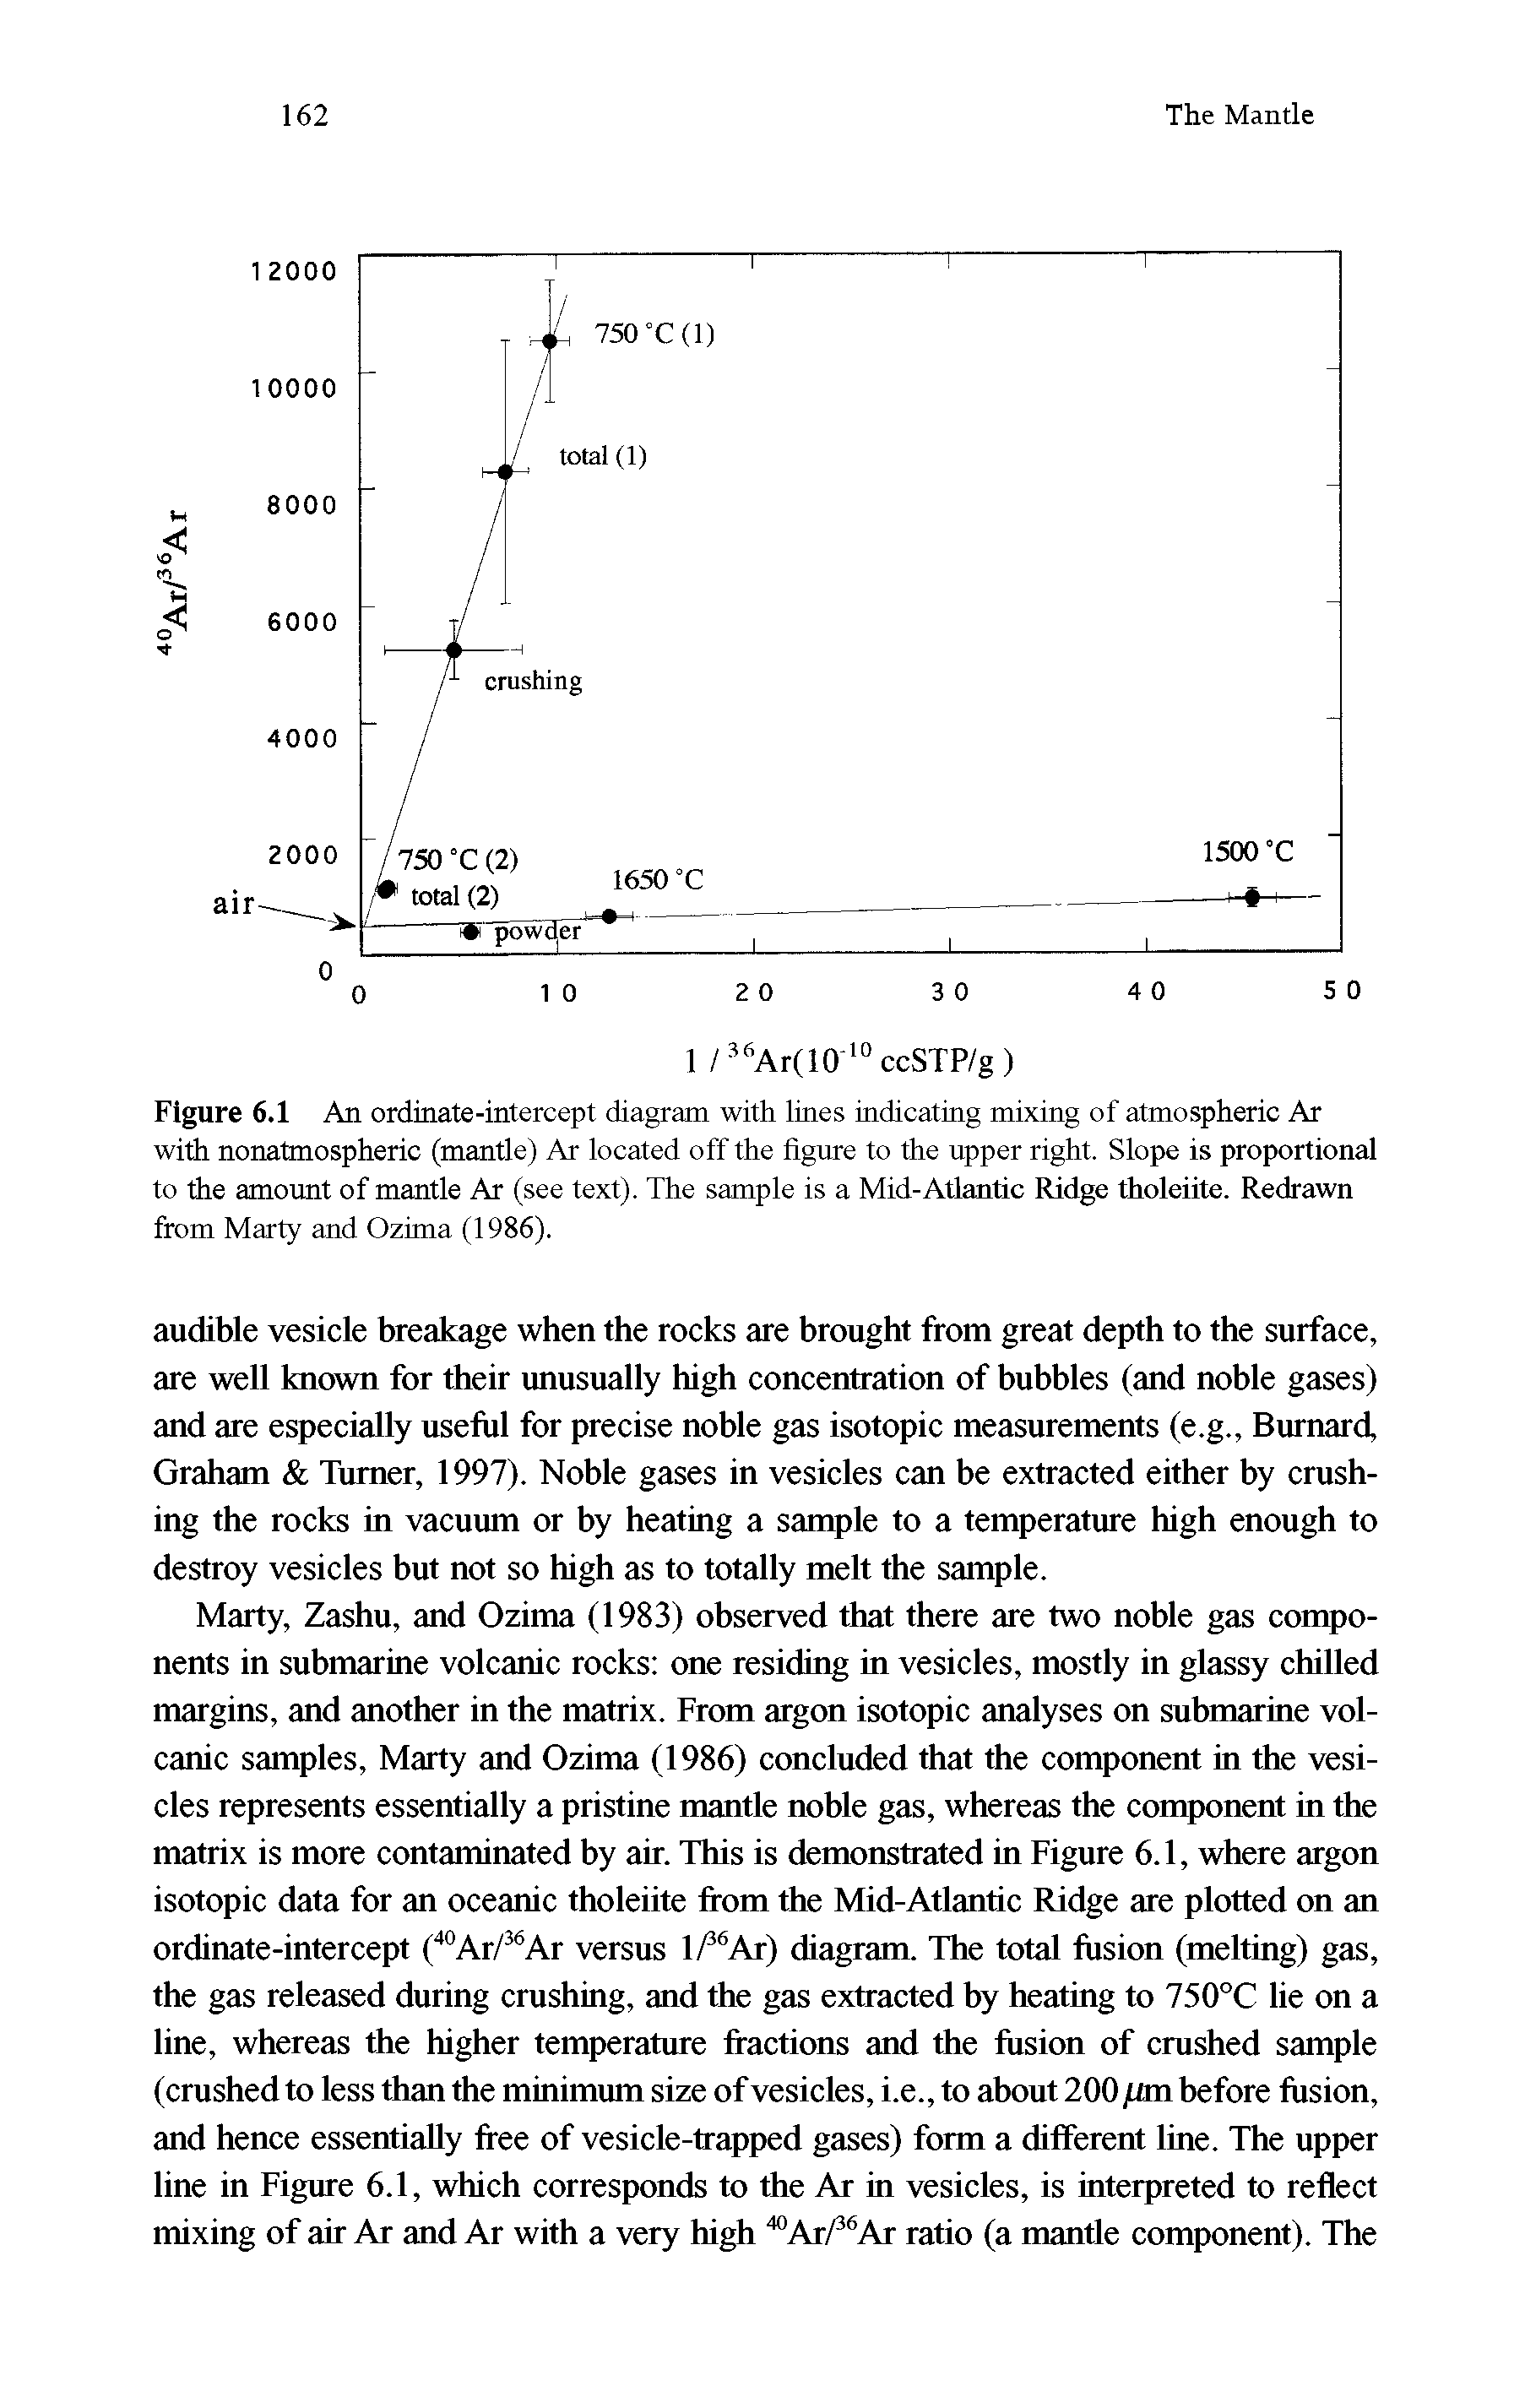 Figure 6.1 An ordinate-intercept diagram with lines indicating mixing of atmospheric Ar with nonatmospheric (mantle) Ar located off the figure to the upper right. Slope is proportional to the amount of mantle Ar (see text). The sample is a Mid-Atlantic Ridge tholeiite. Redrawn from Marty and Ozima (1986).